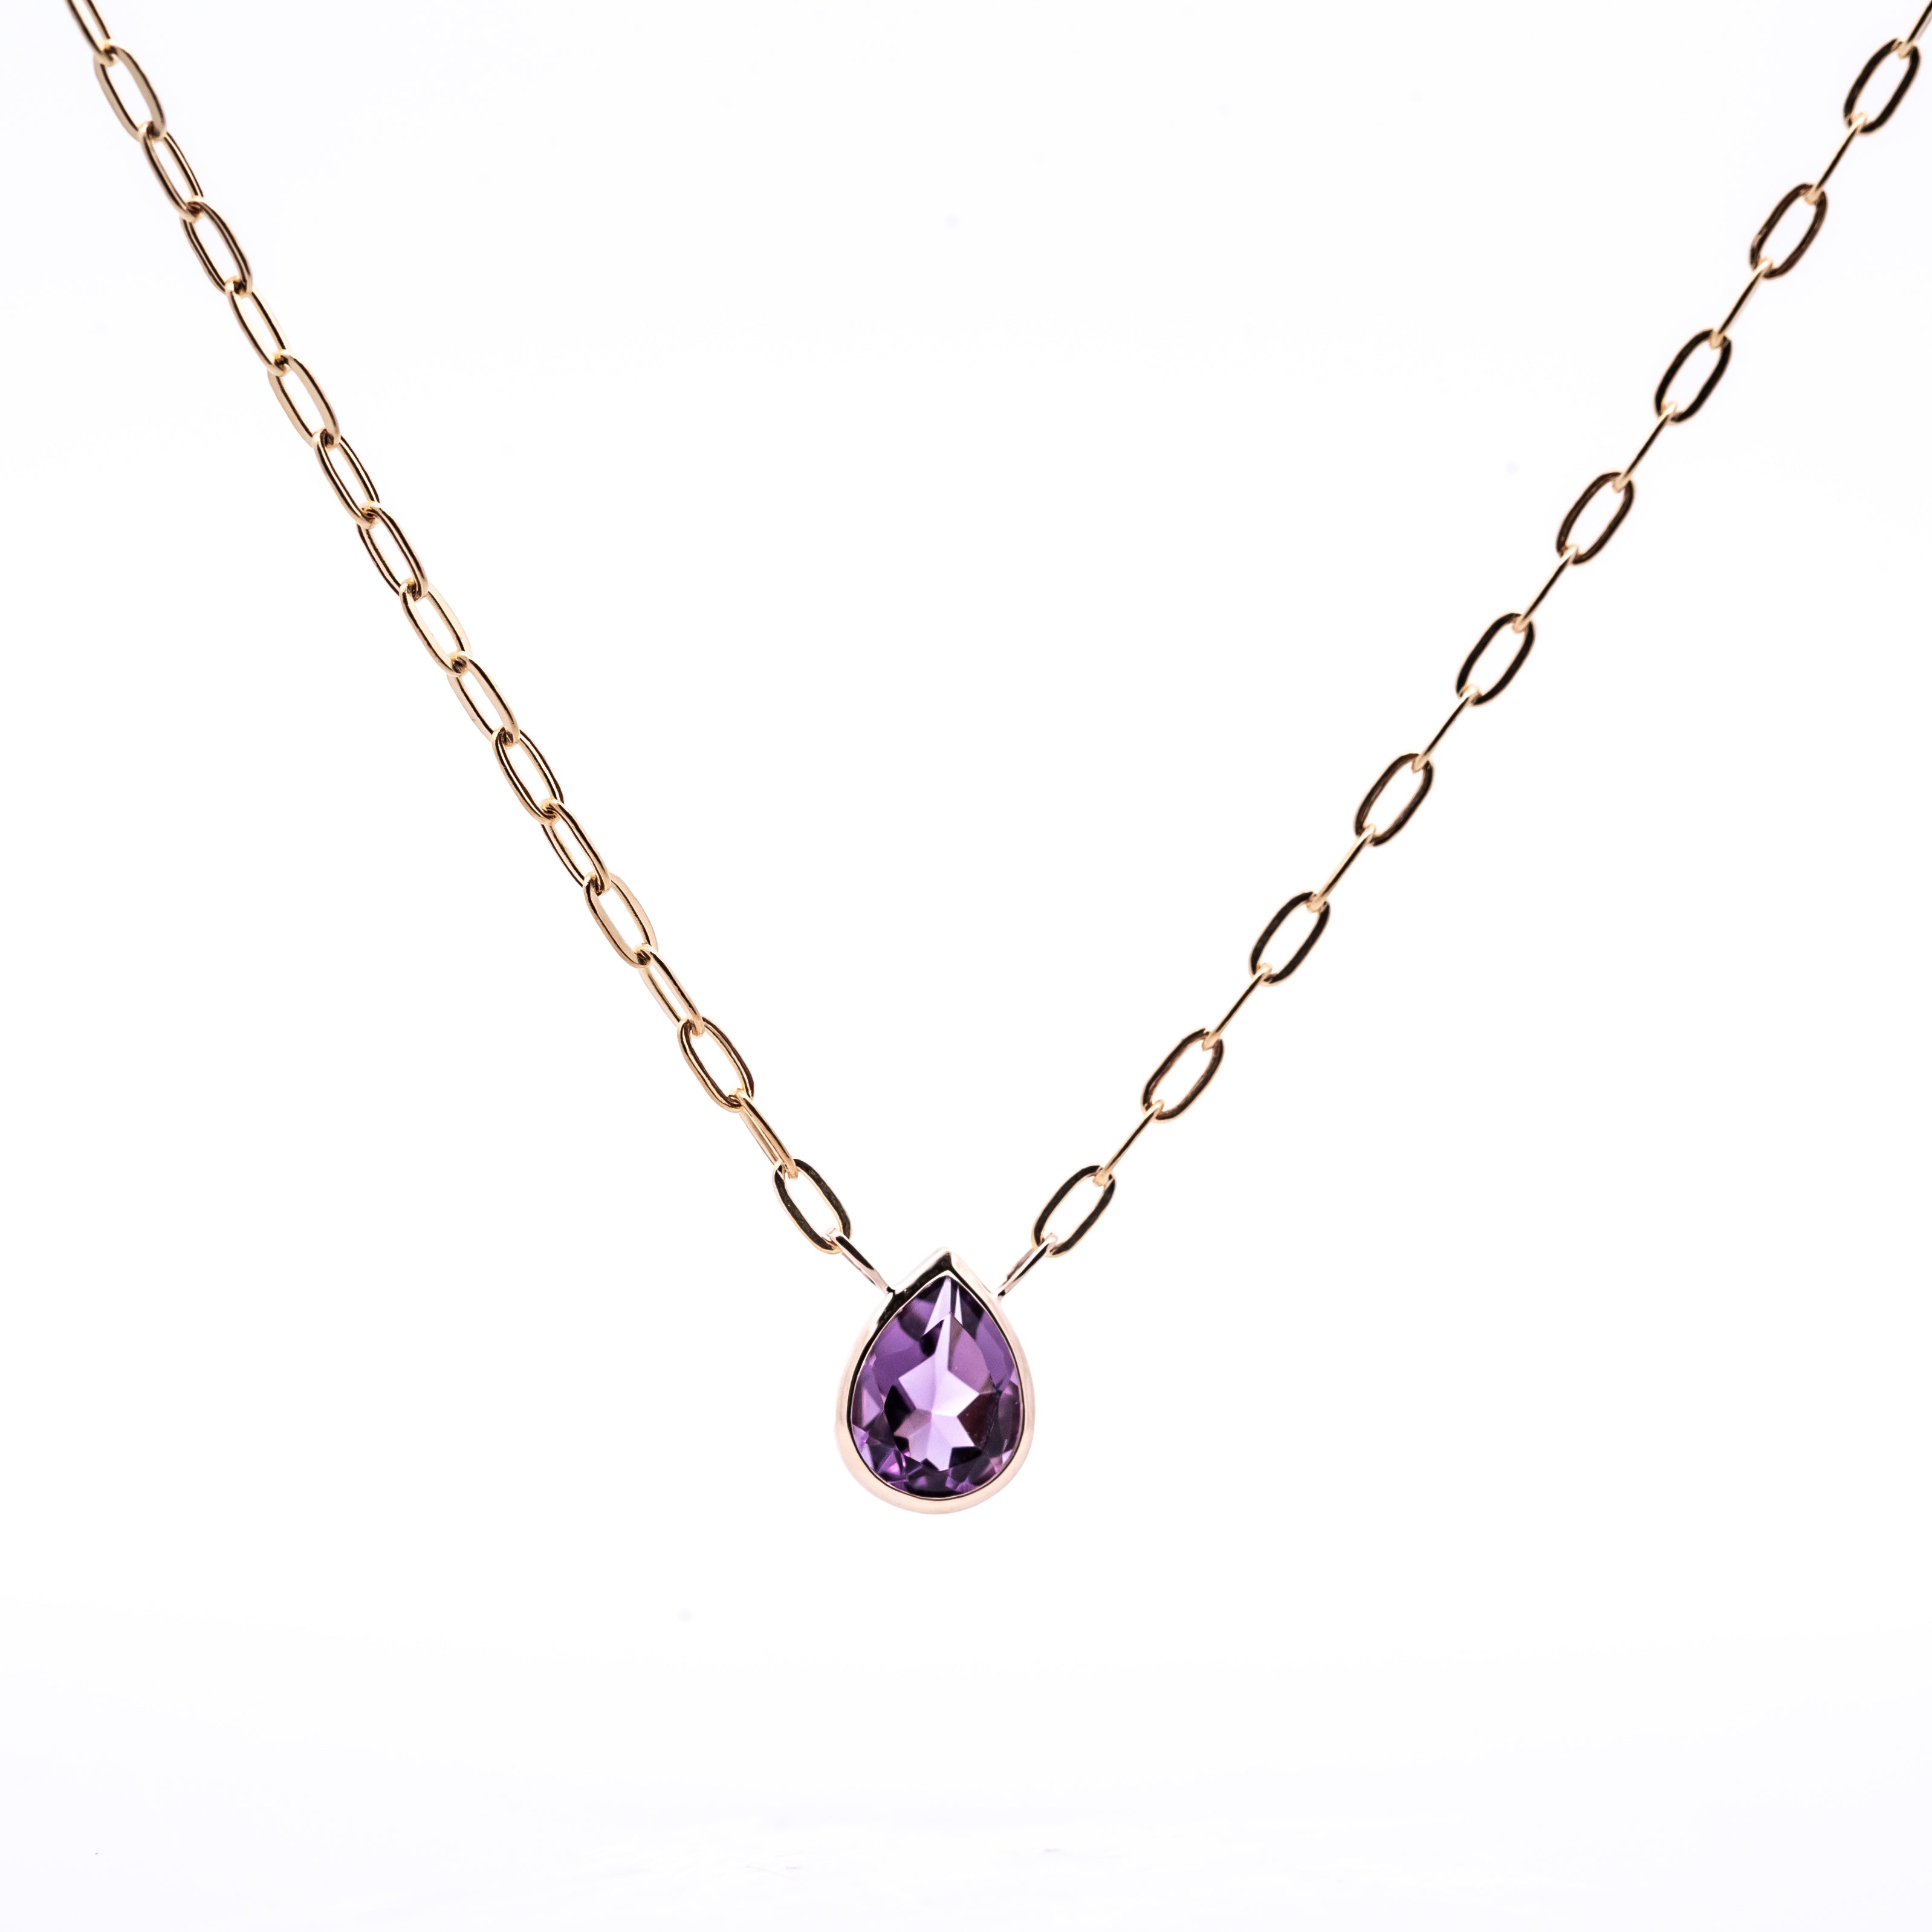 Station Amethyst Necklace - Colored Stone Necklace